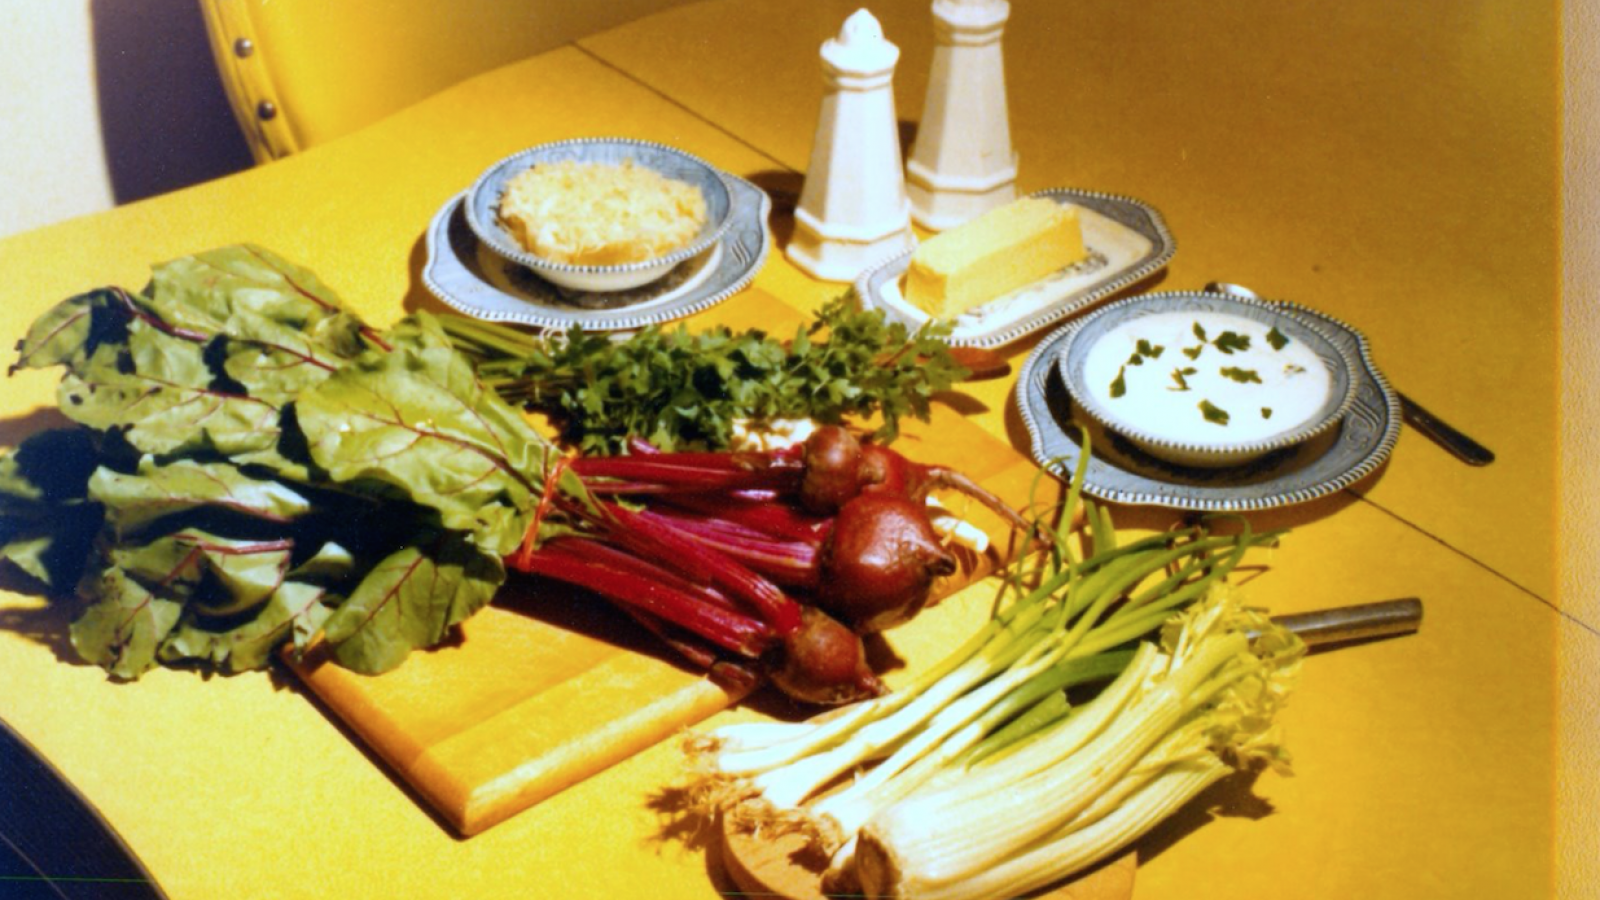 Borscht ingredients at the home of Julia Byndas, Cleveland, 1979.